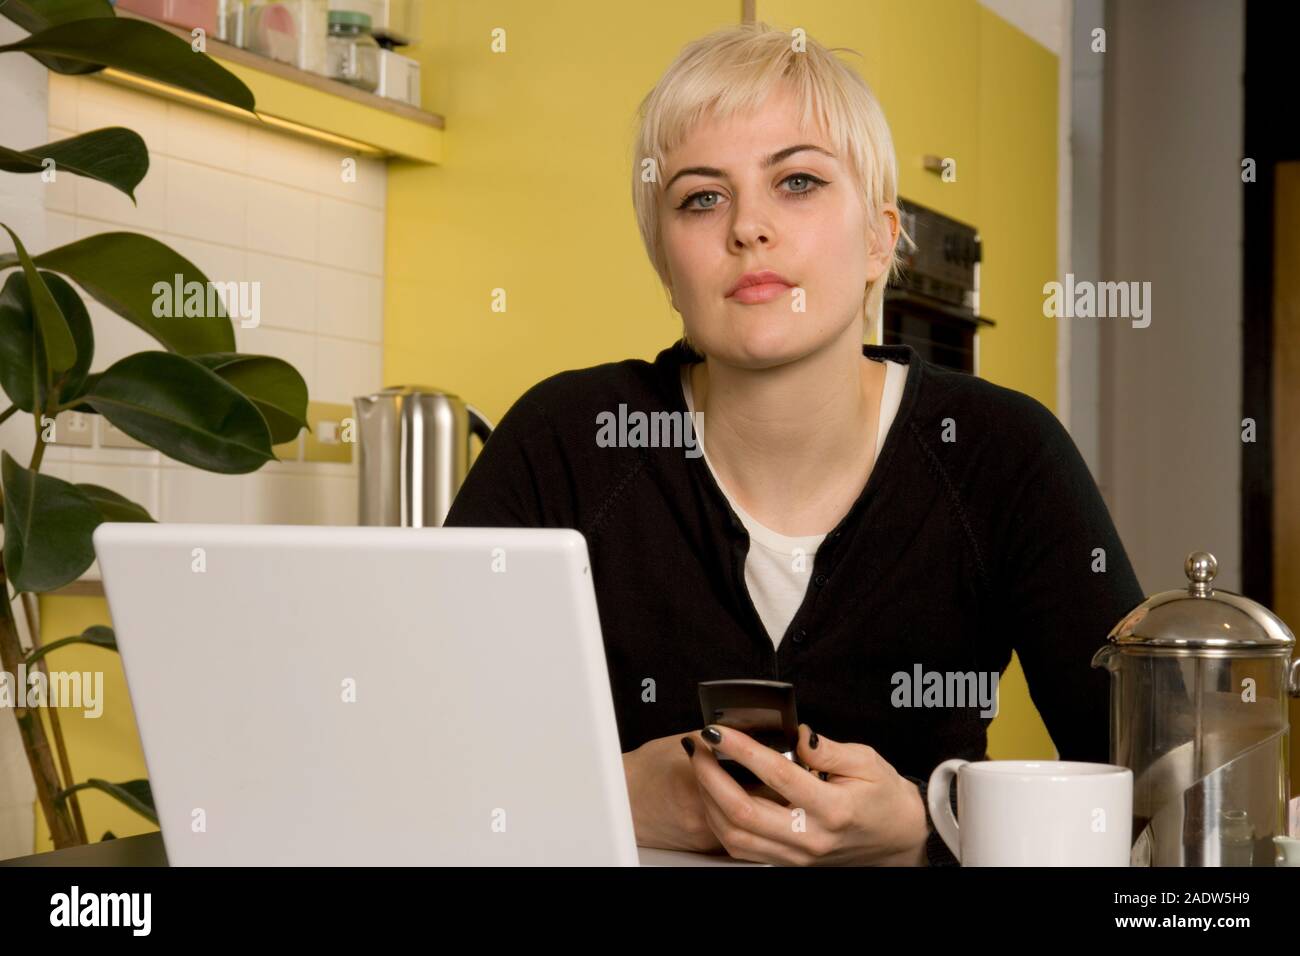 A young woman working from home in her kitchen laptop open on the table in front of her. Stock Photo